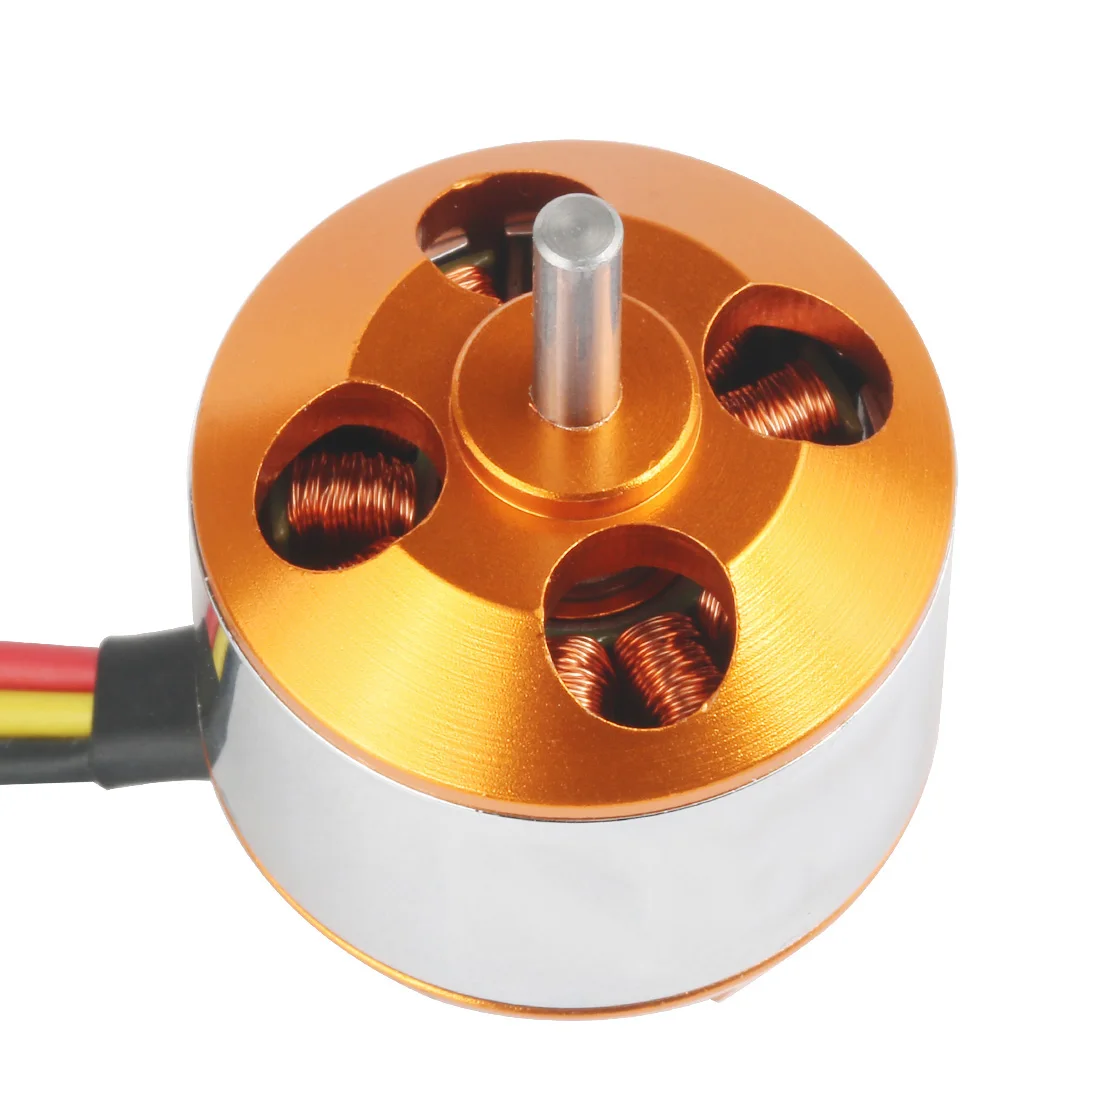 A221210T 1400KV Brushless DC Motor for RC Aircraft/KKmulticopter 4axle Quad copter UFO +FS